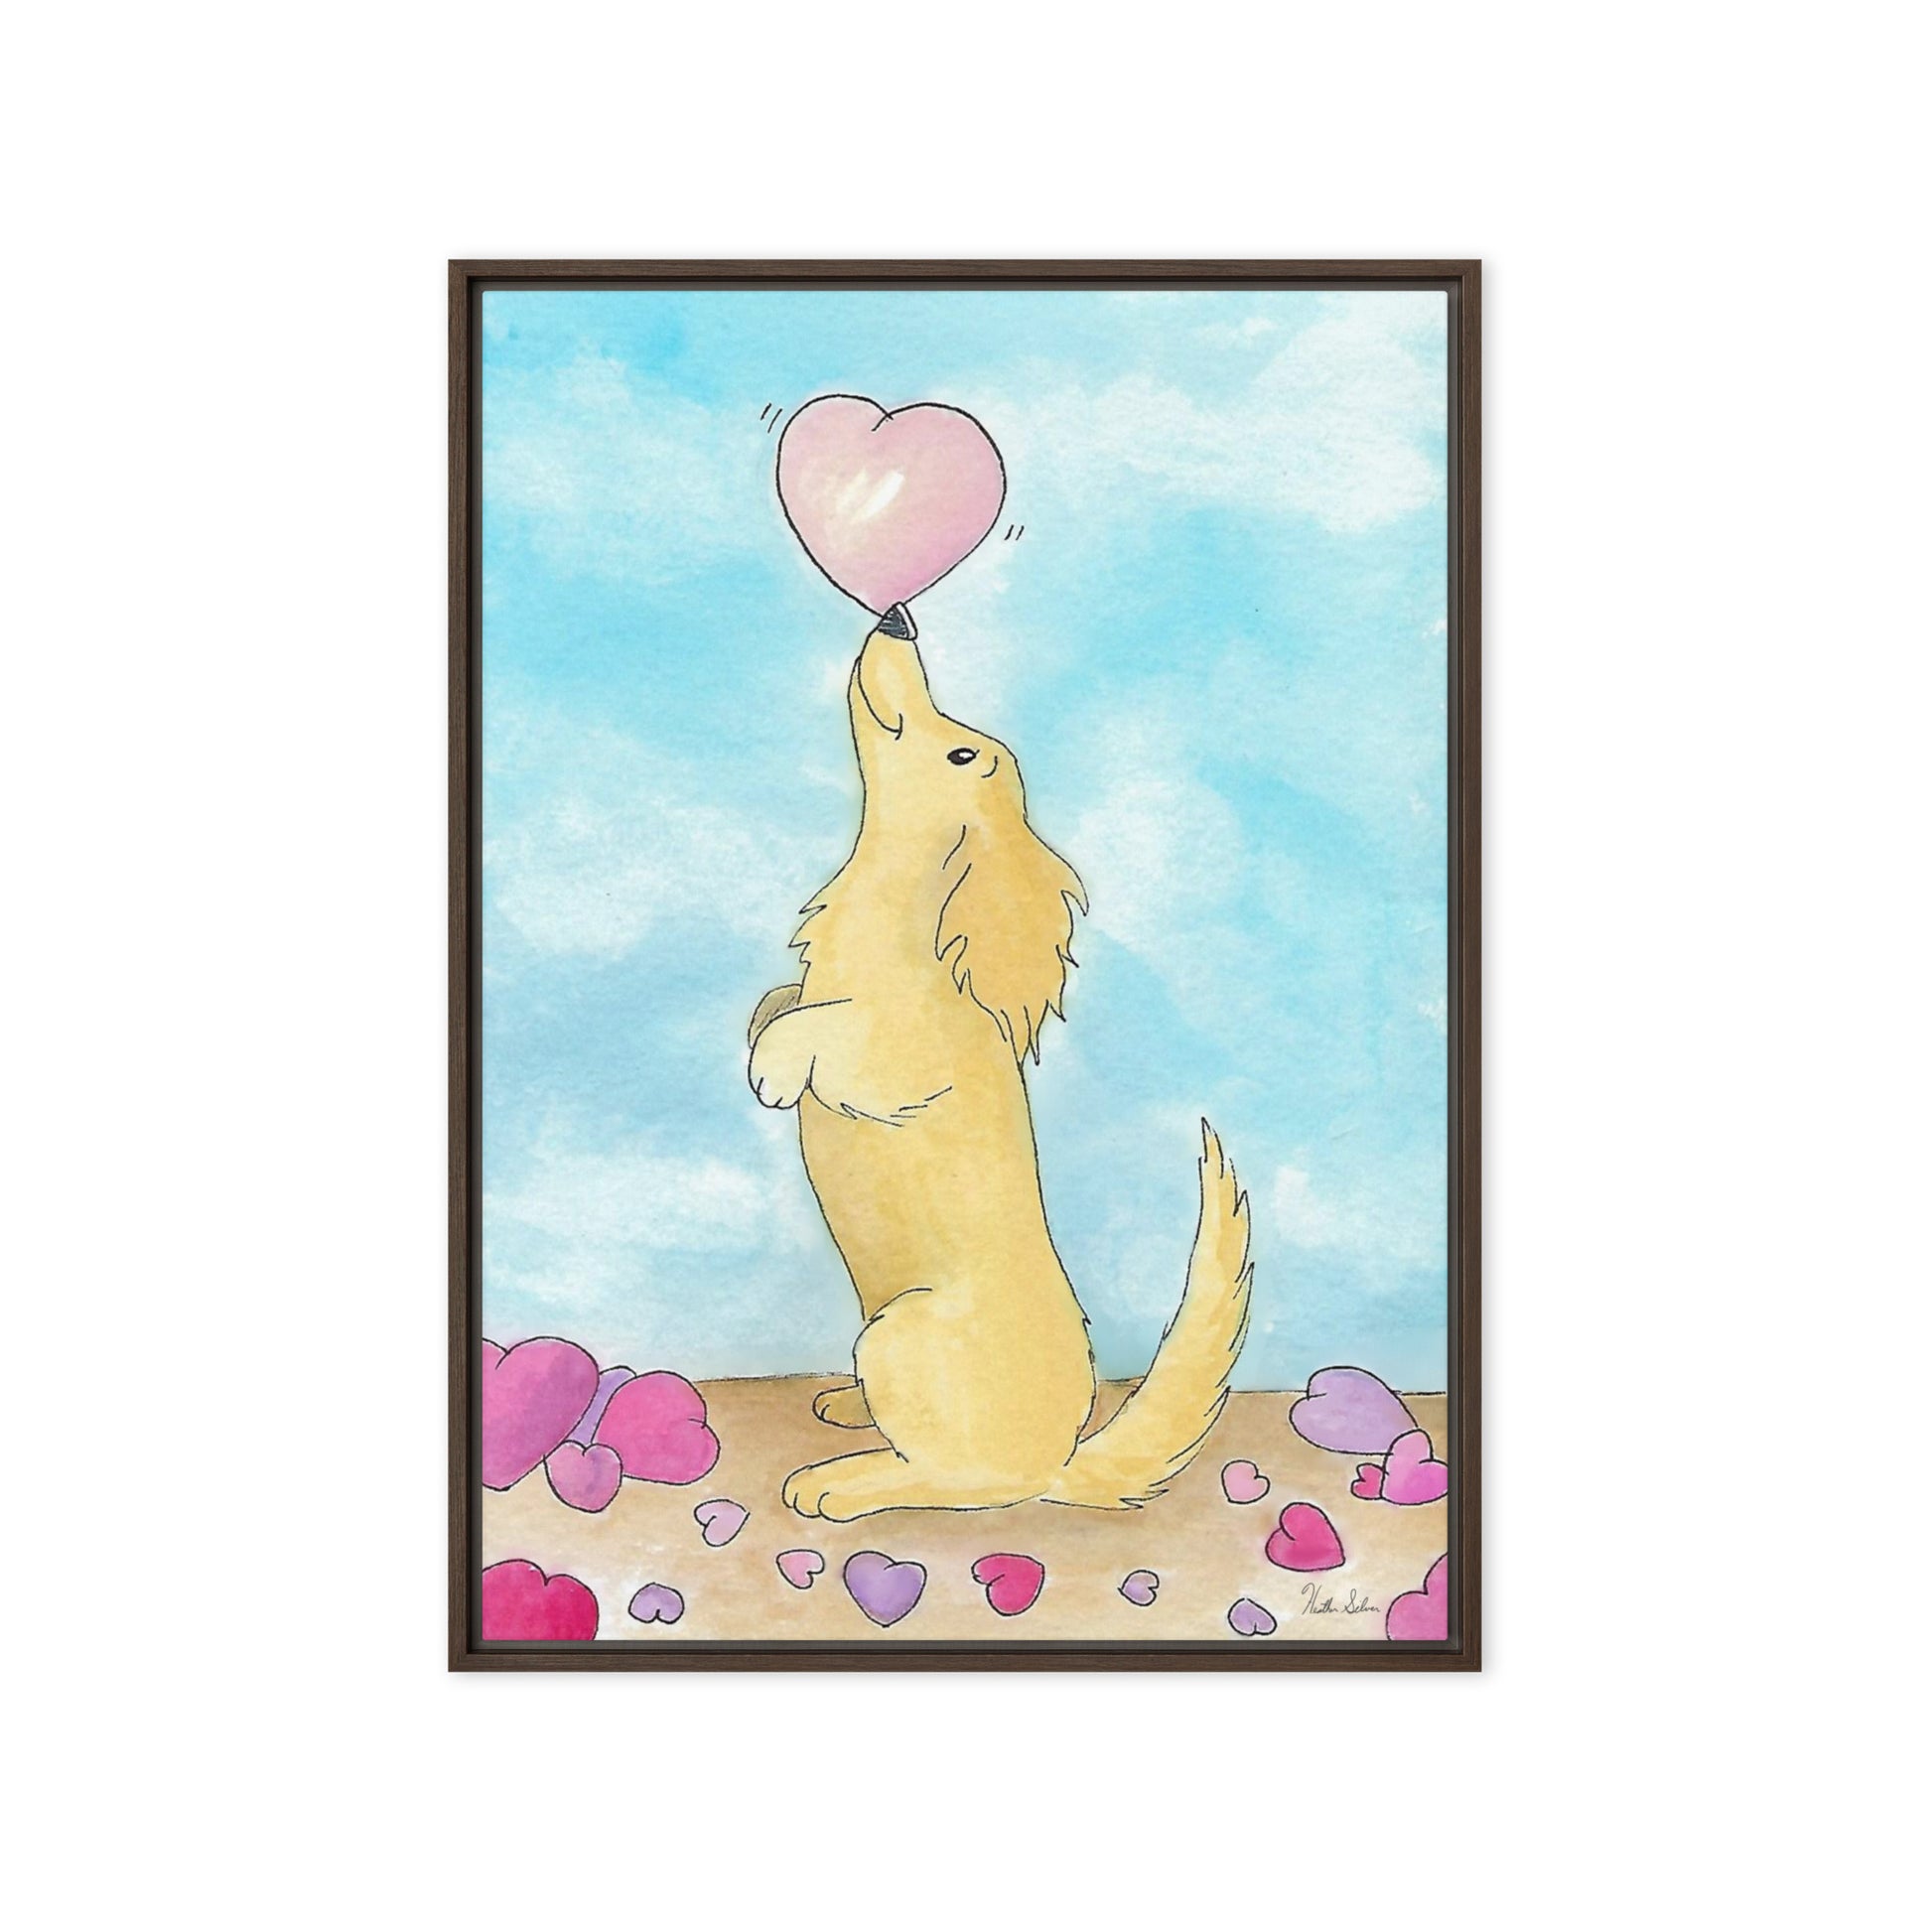 20 by 28 inch framed canvas Puppy Love print. The canvas is in a brown pine wood frame.